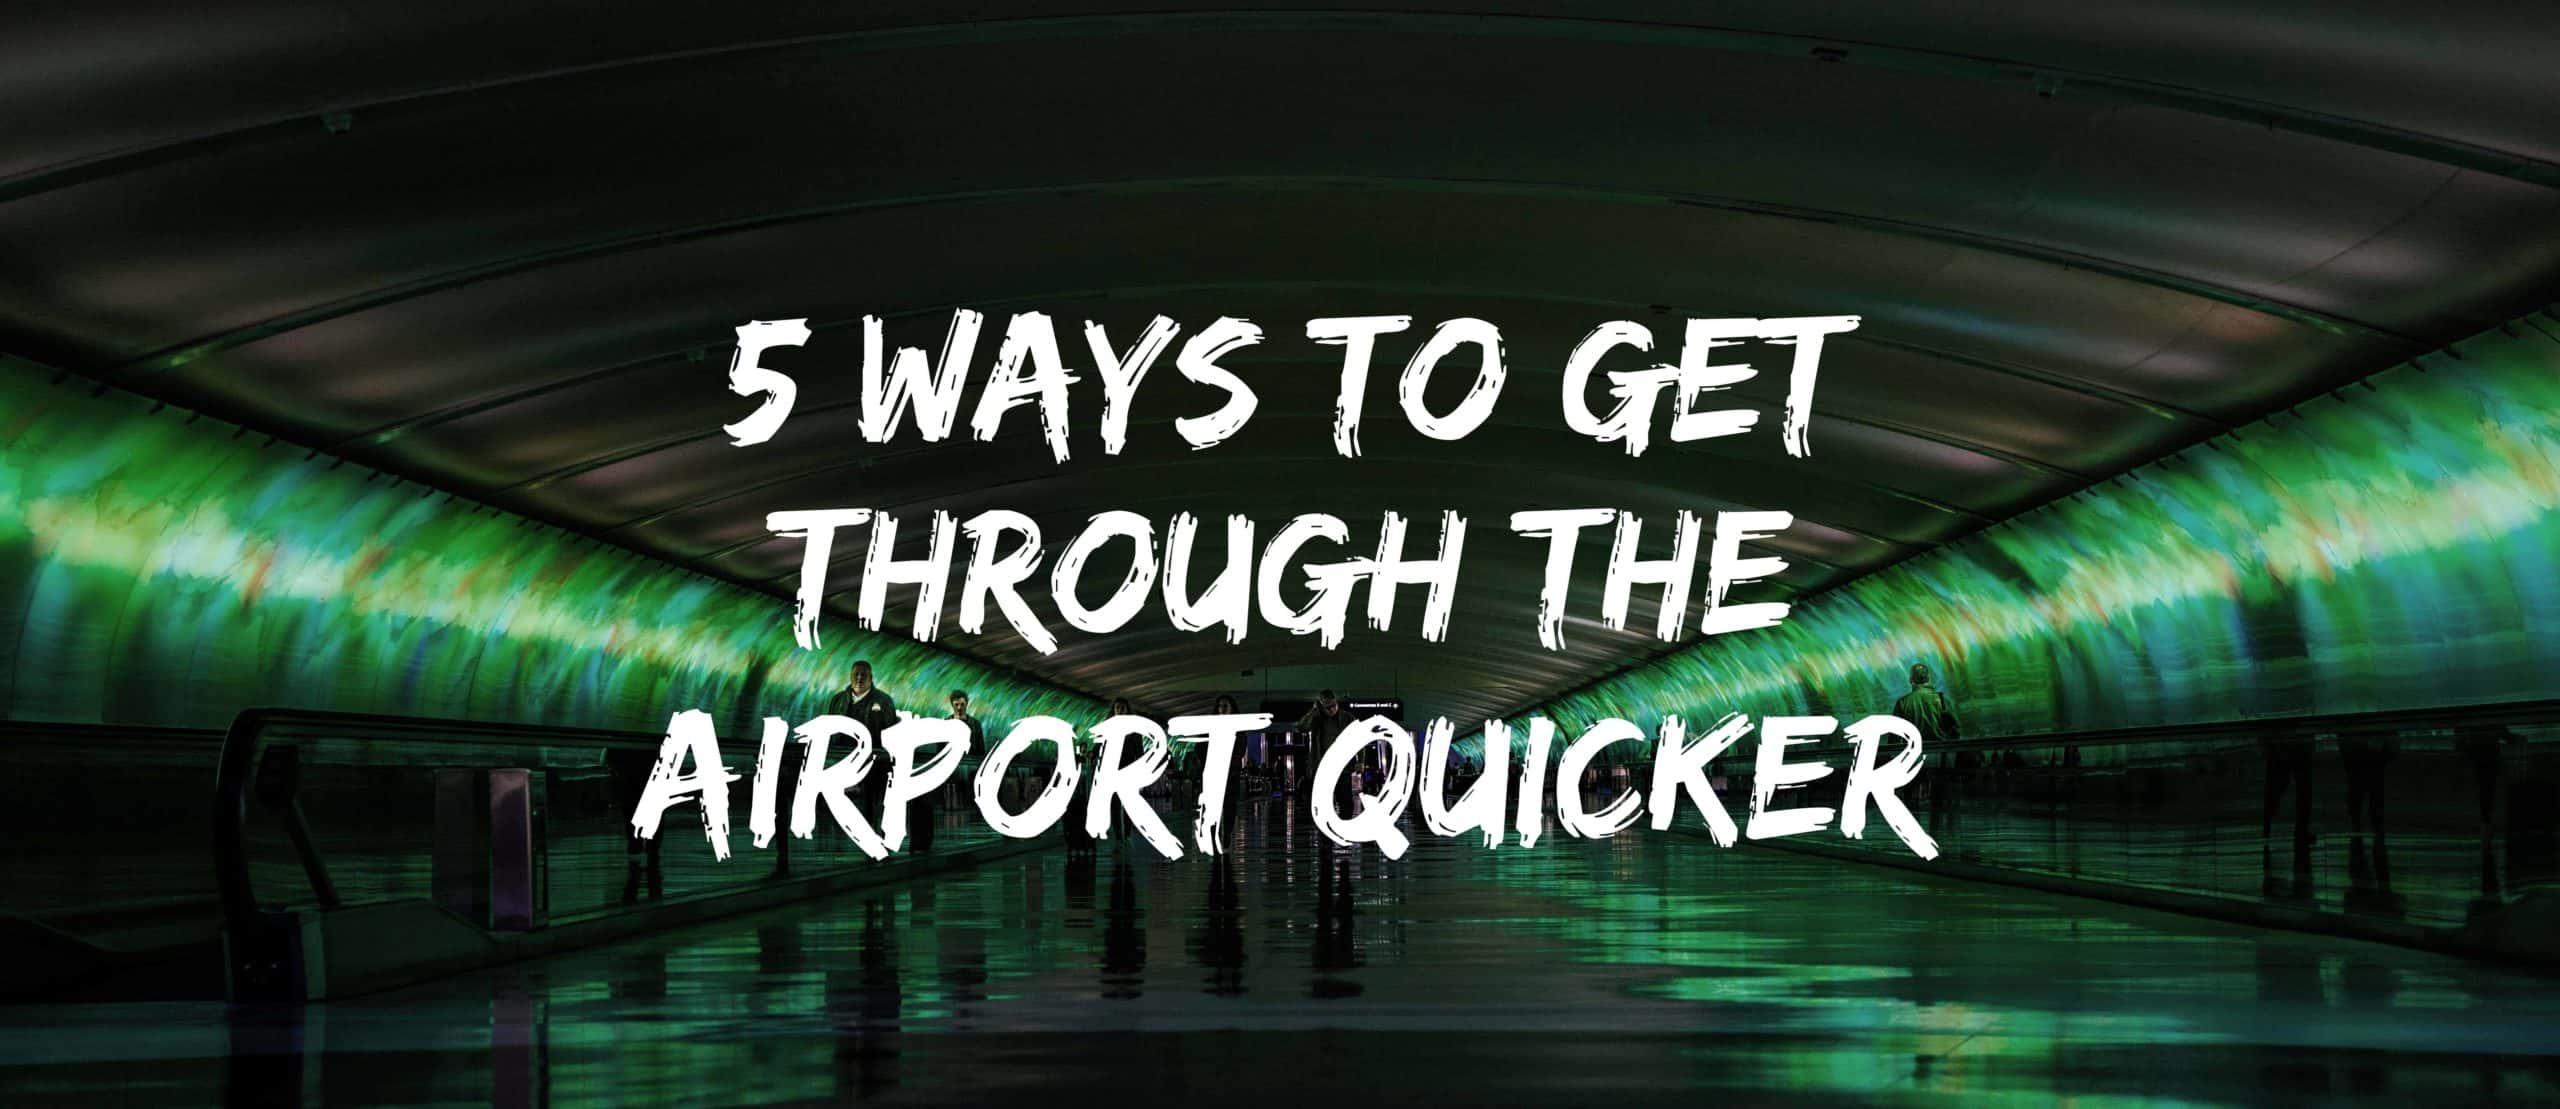 5 ways to get through the airport faster